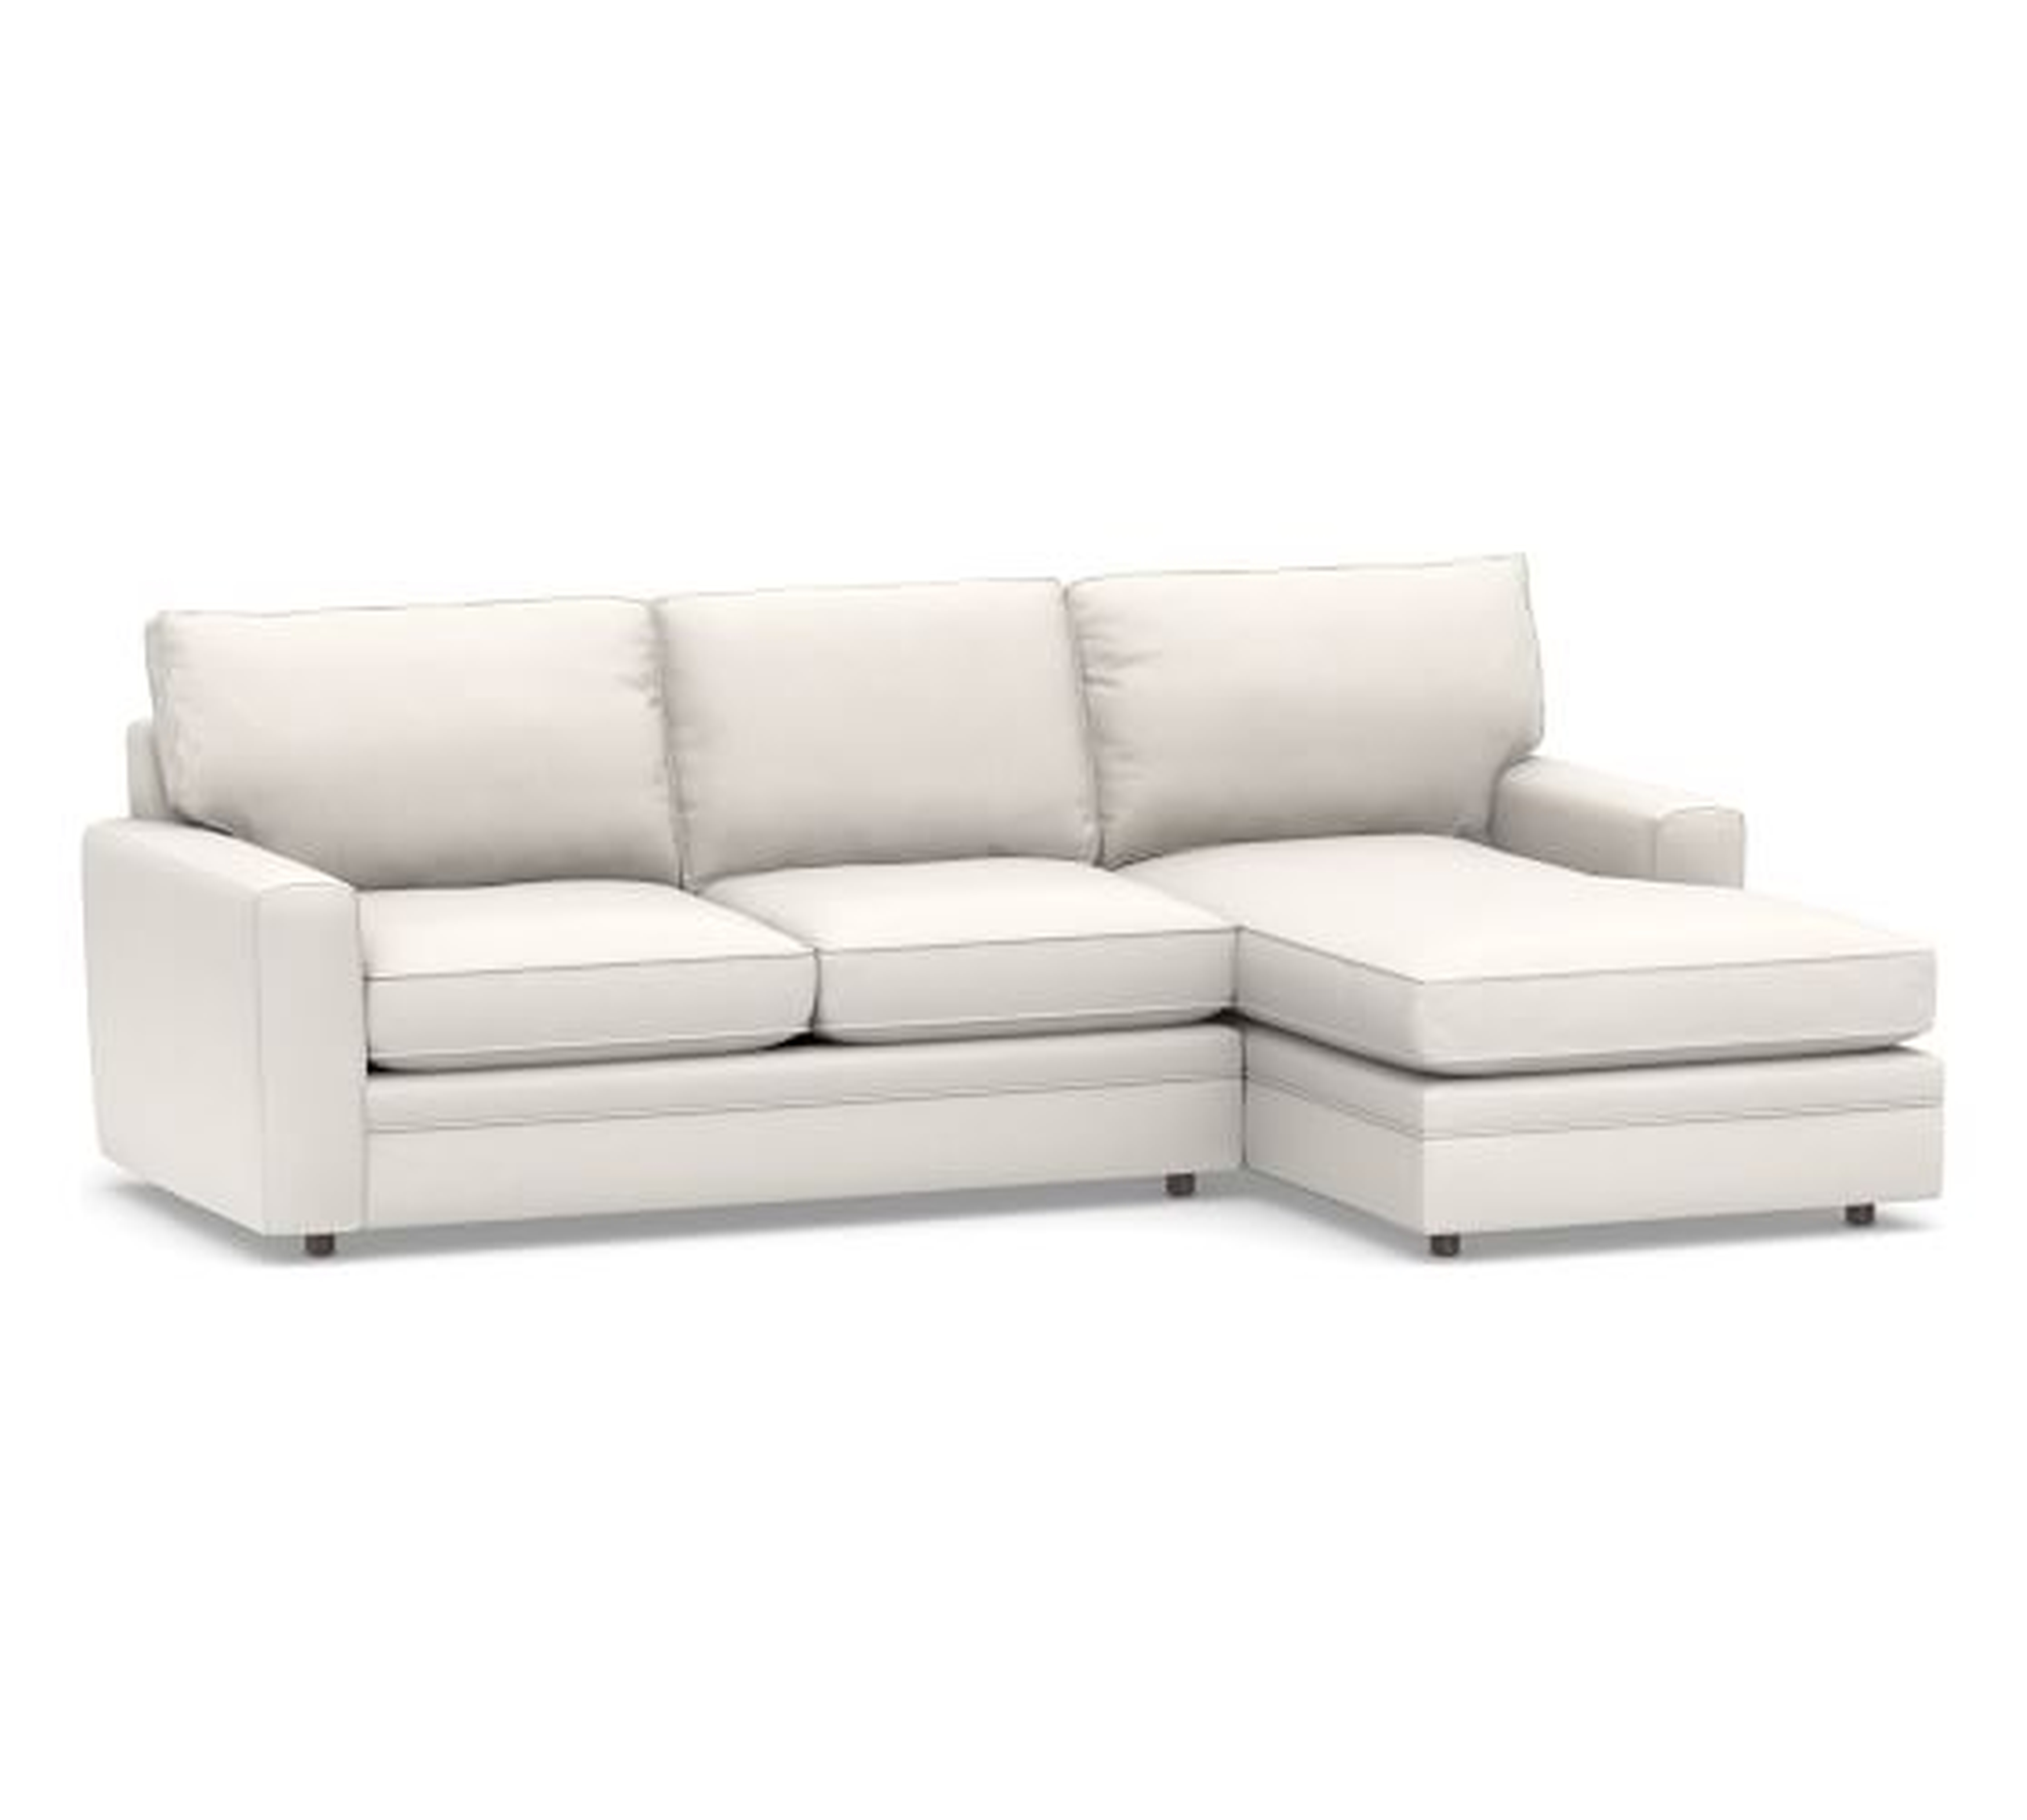 Pearce Square Arm Upholstered Sofa with Chaise Sectional - Pottery Barn